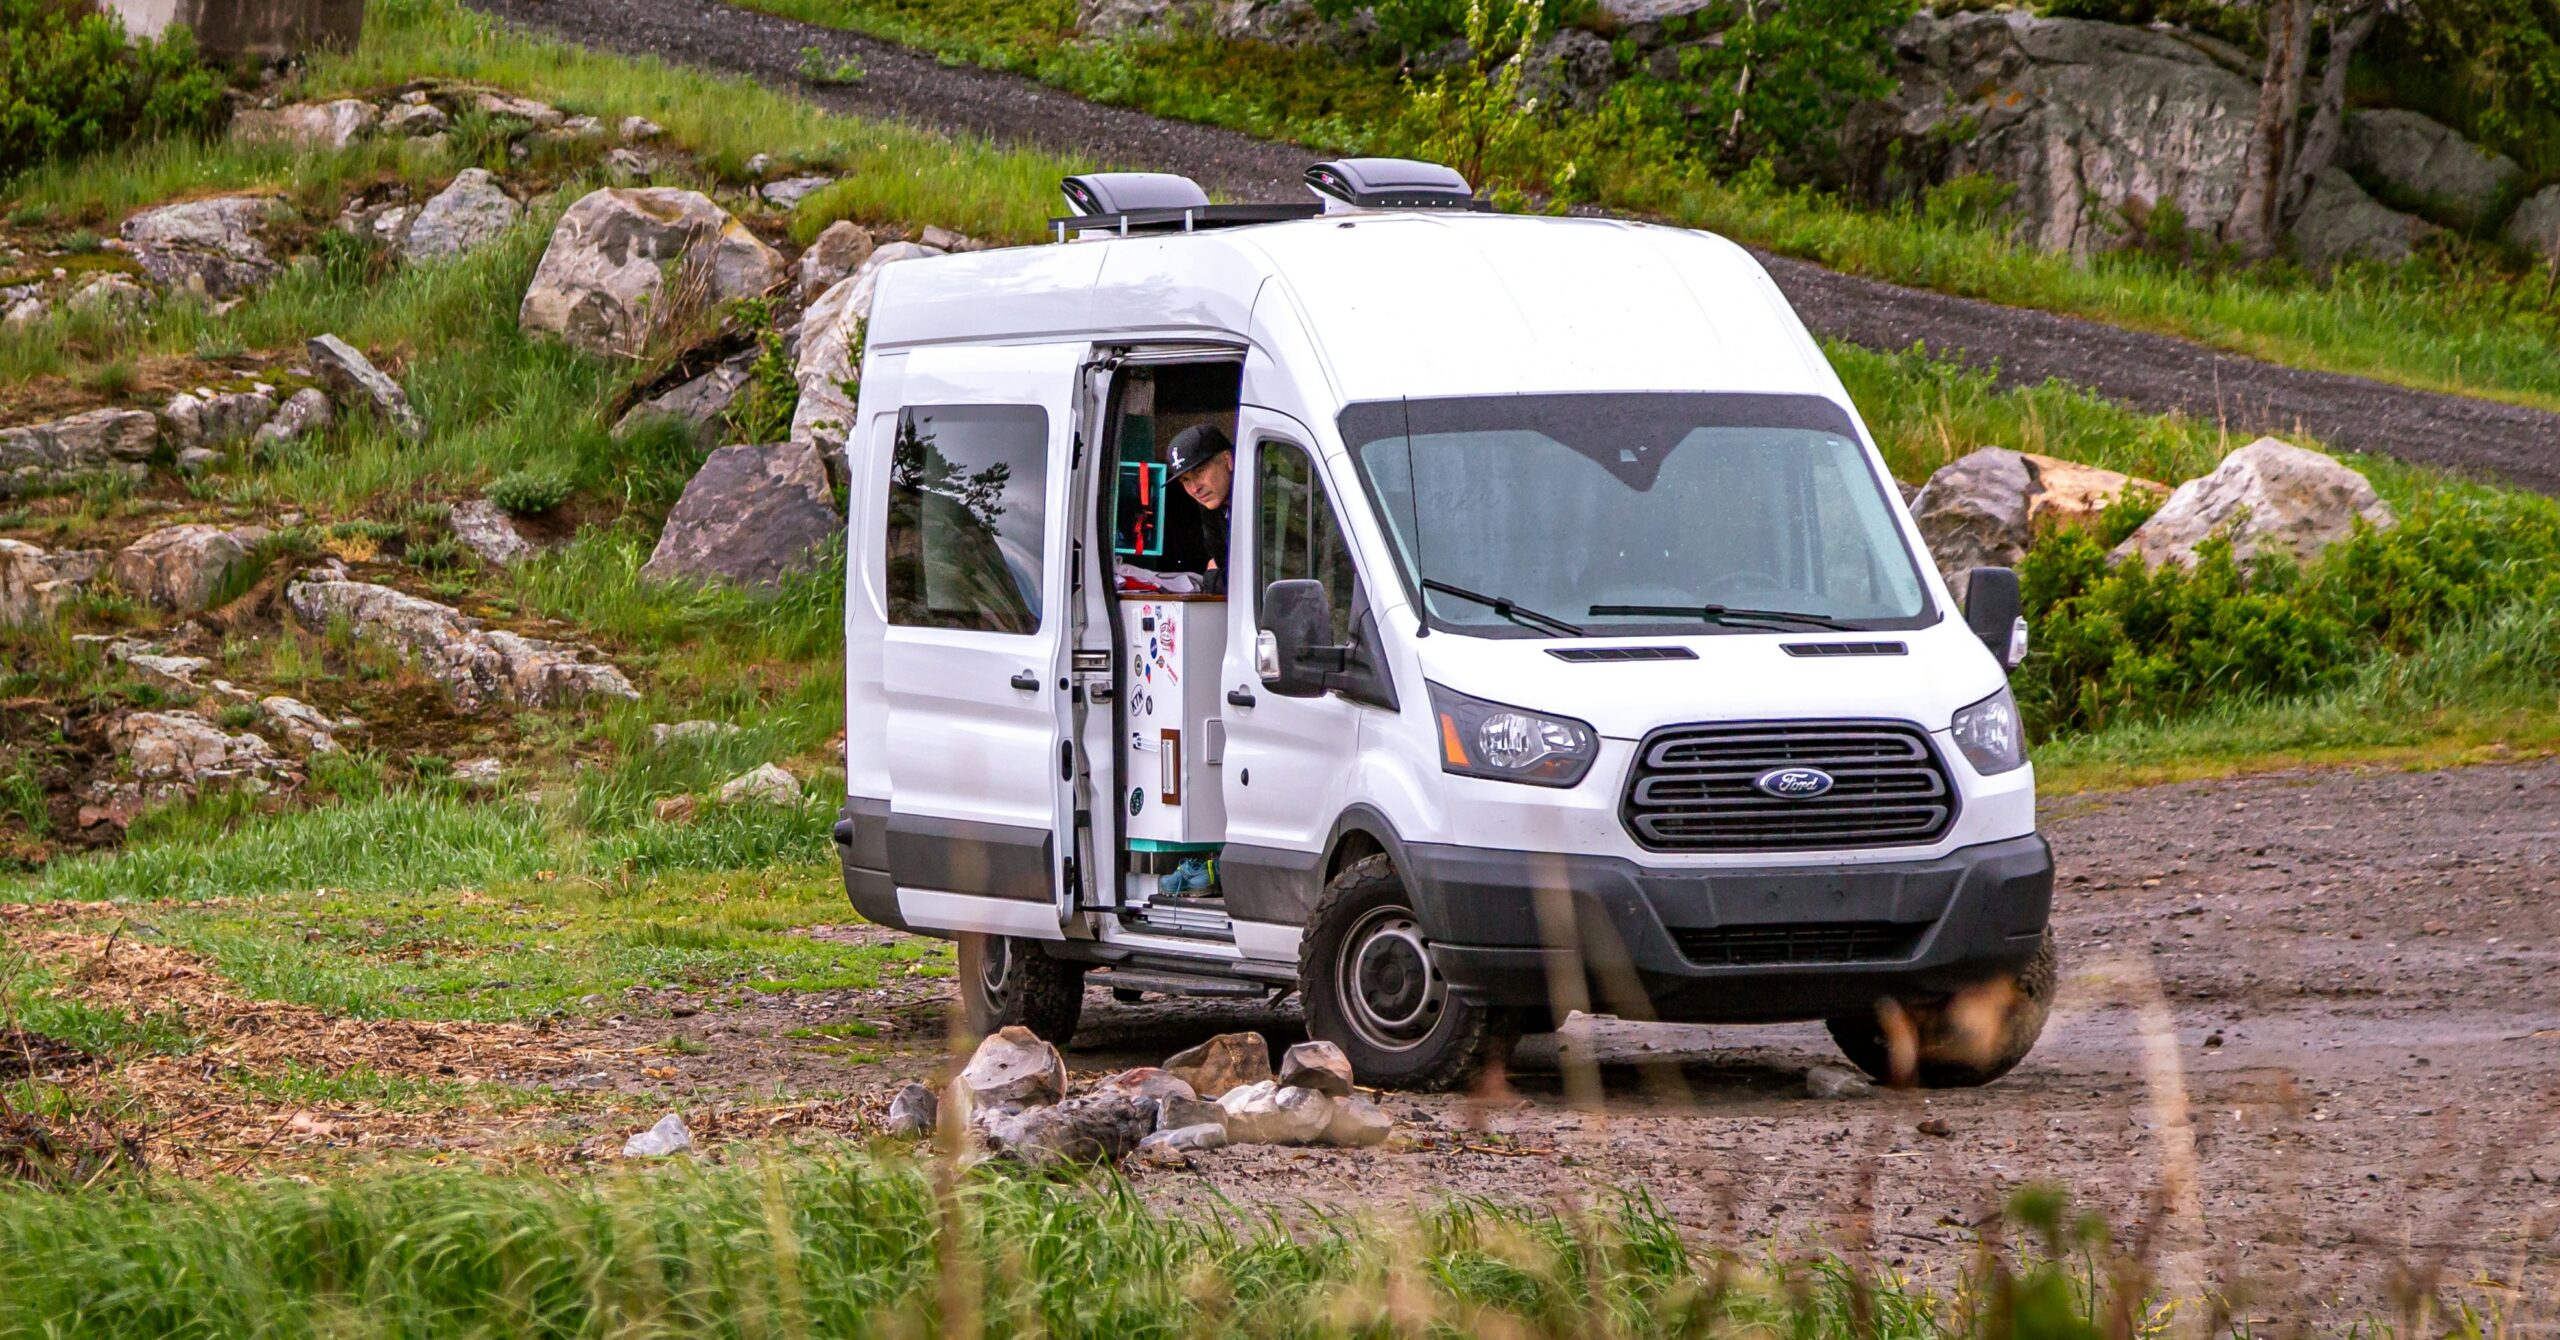 Photo of a Class B RV - sometimes referred to as a camper van